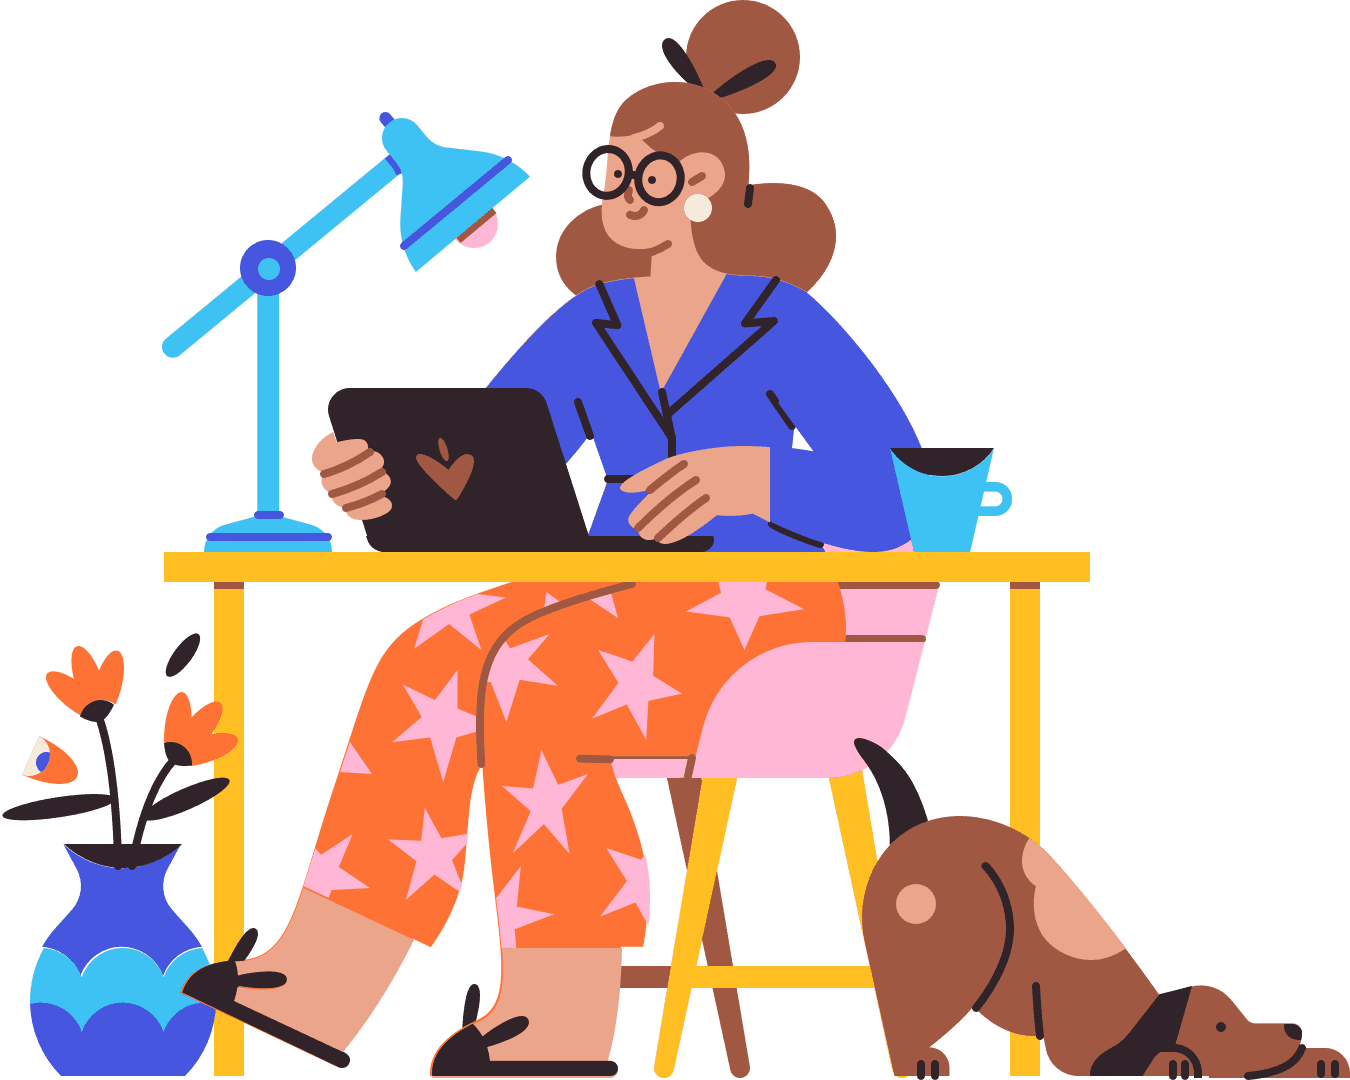 Illustration of person sitting at a desk with an open laptop and a dog on the floor